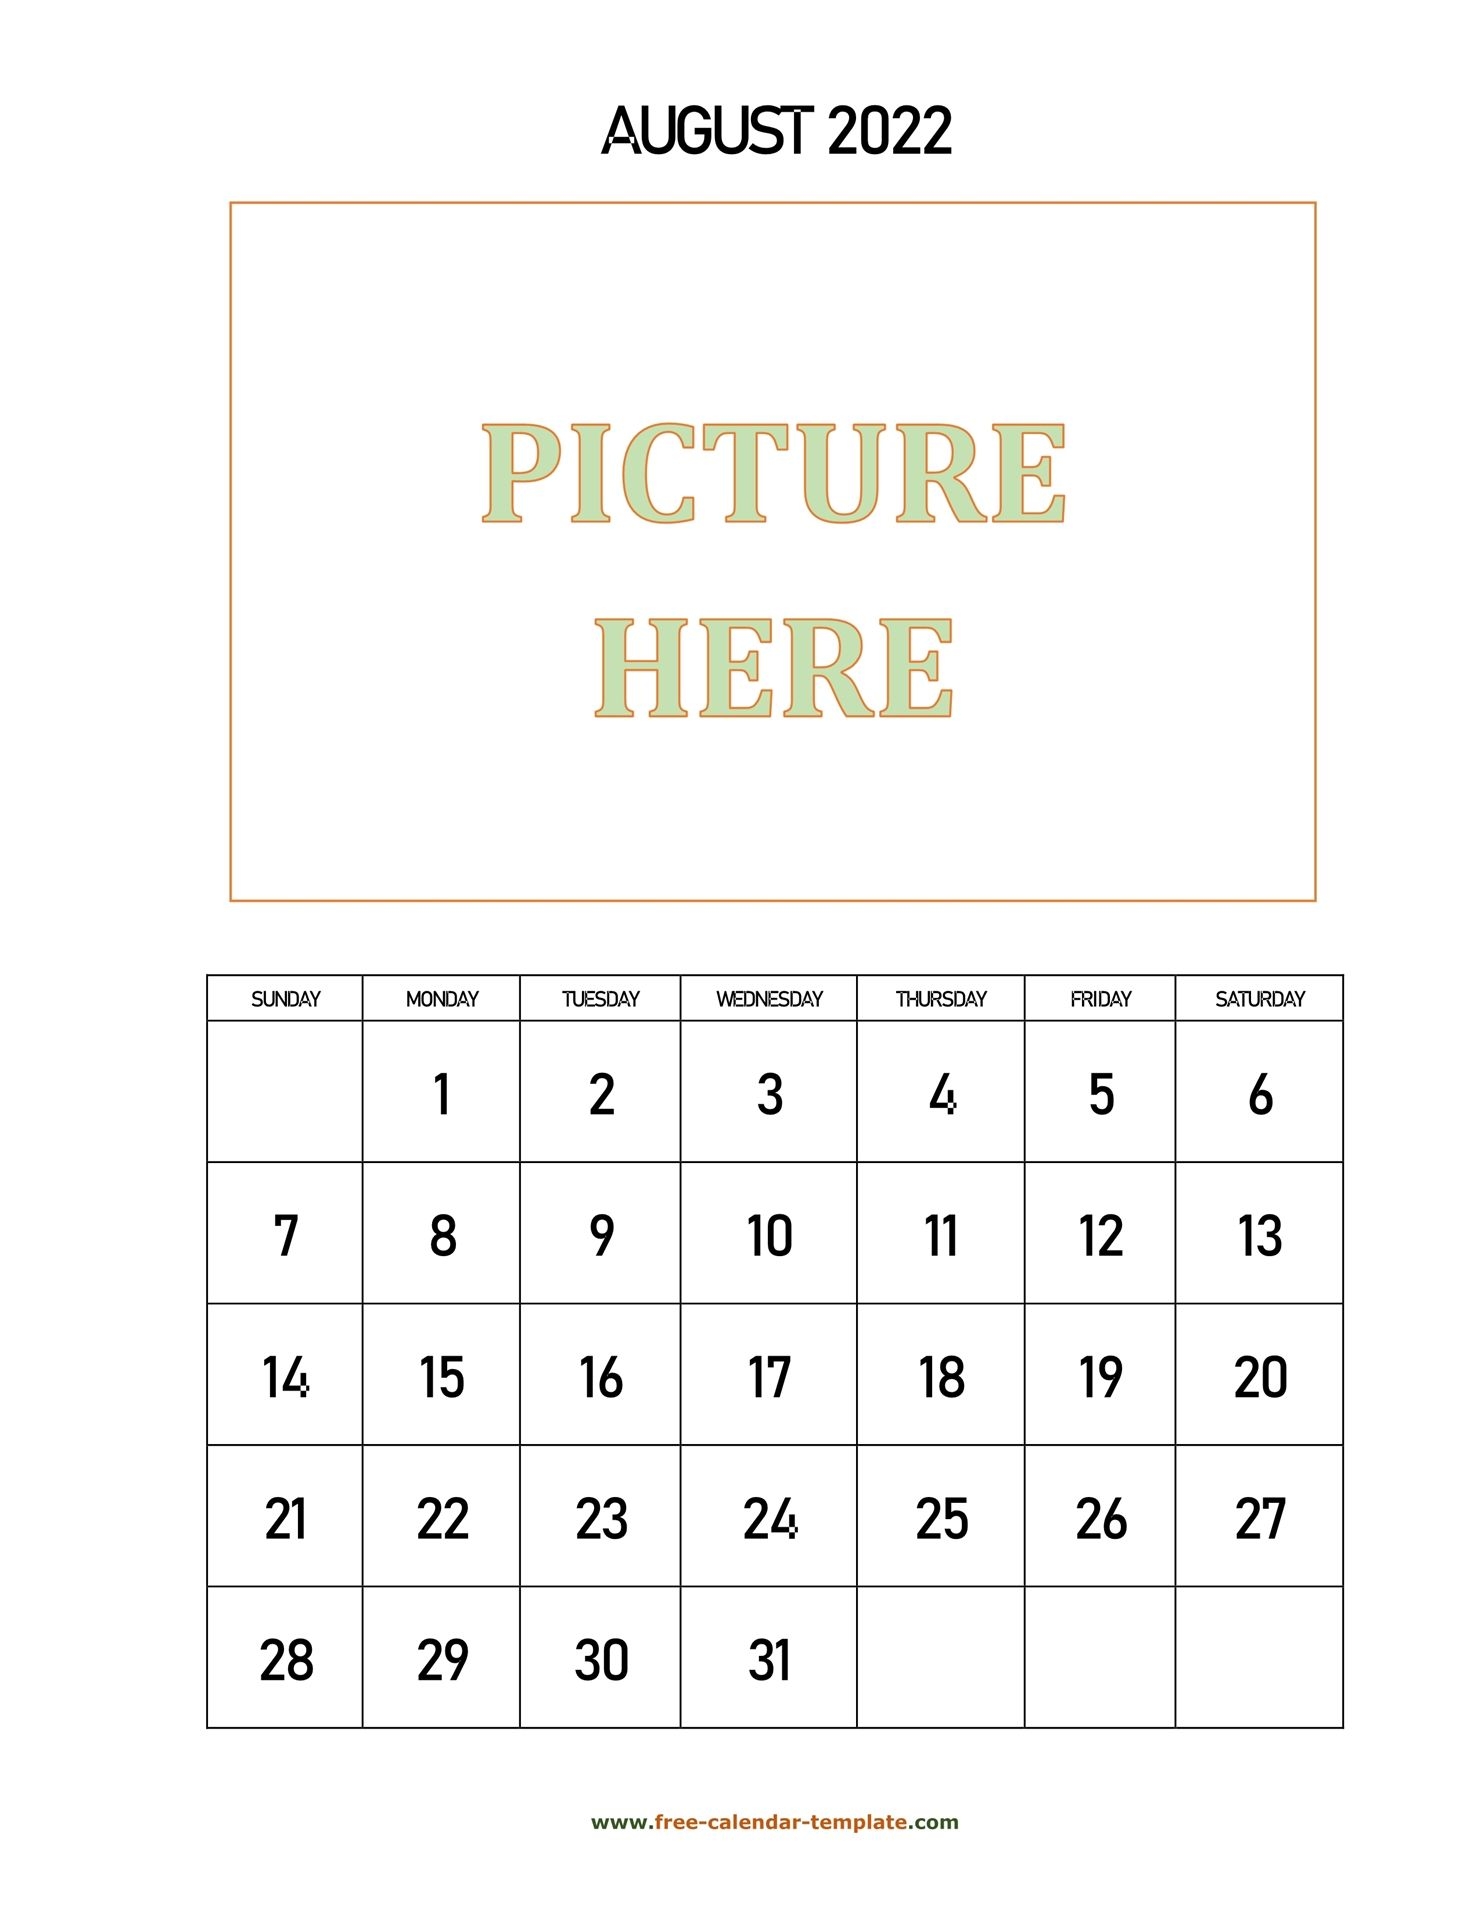 August Printable 2022 Calendar, Space For Add Picture